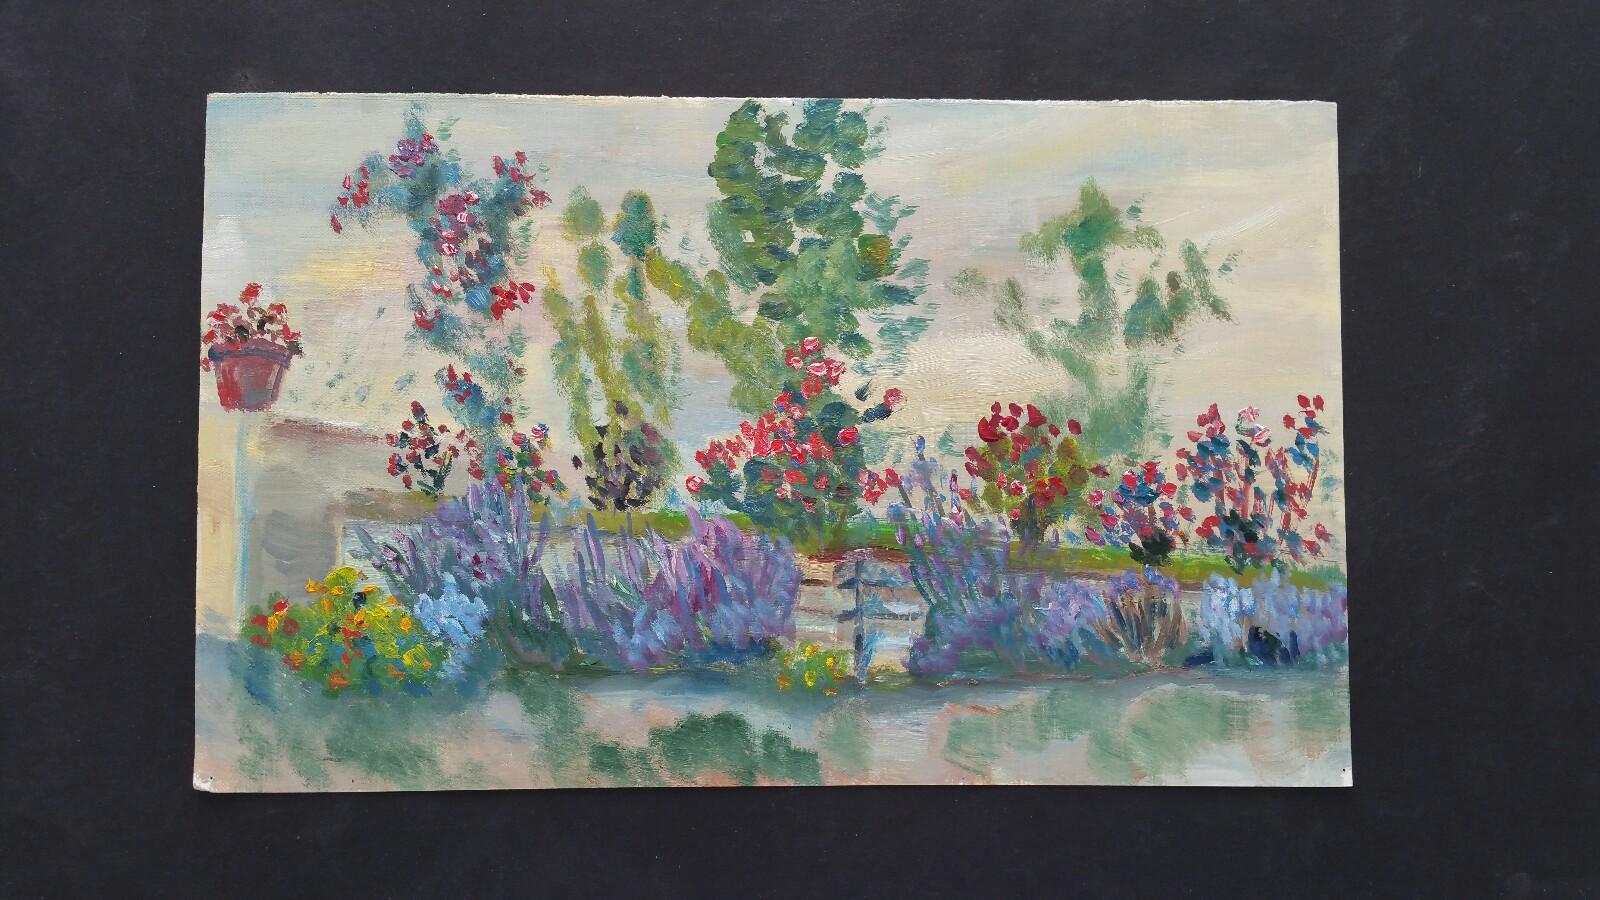 20th Century French Oil Painting Summer Garden Border - Gray Landscape Painting by Unknown